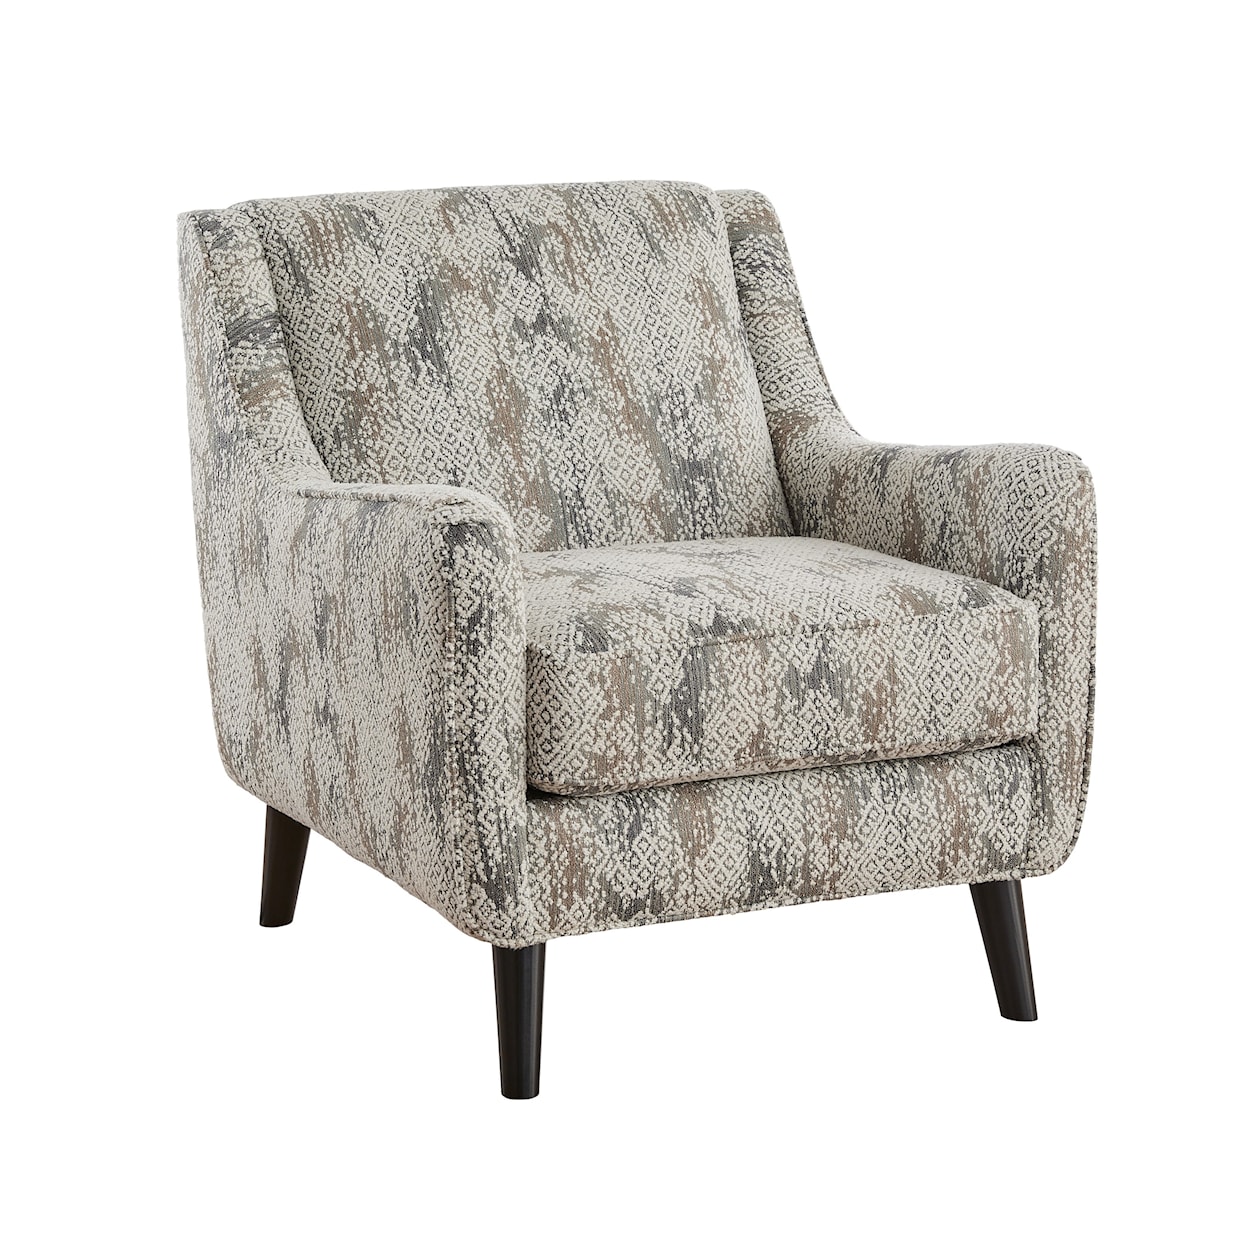 Fusion Furniture 5006 CROSSROADS MINERAL Accent Chair